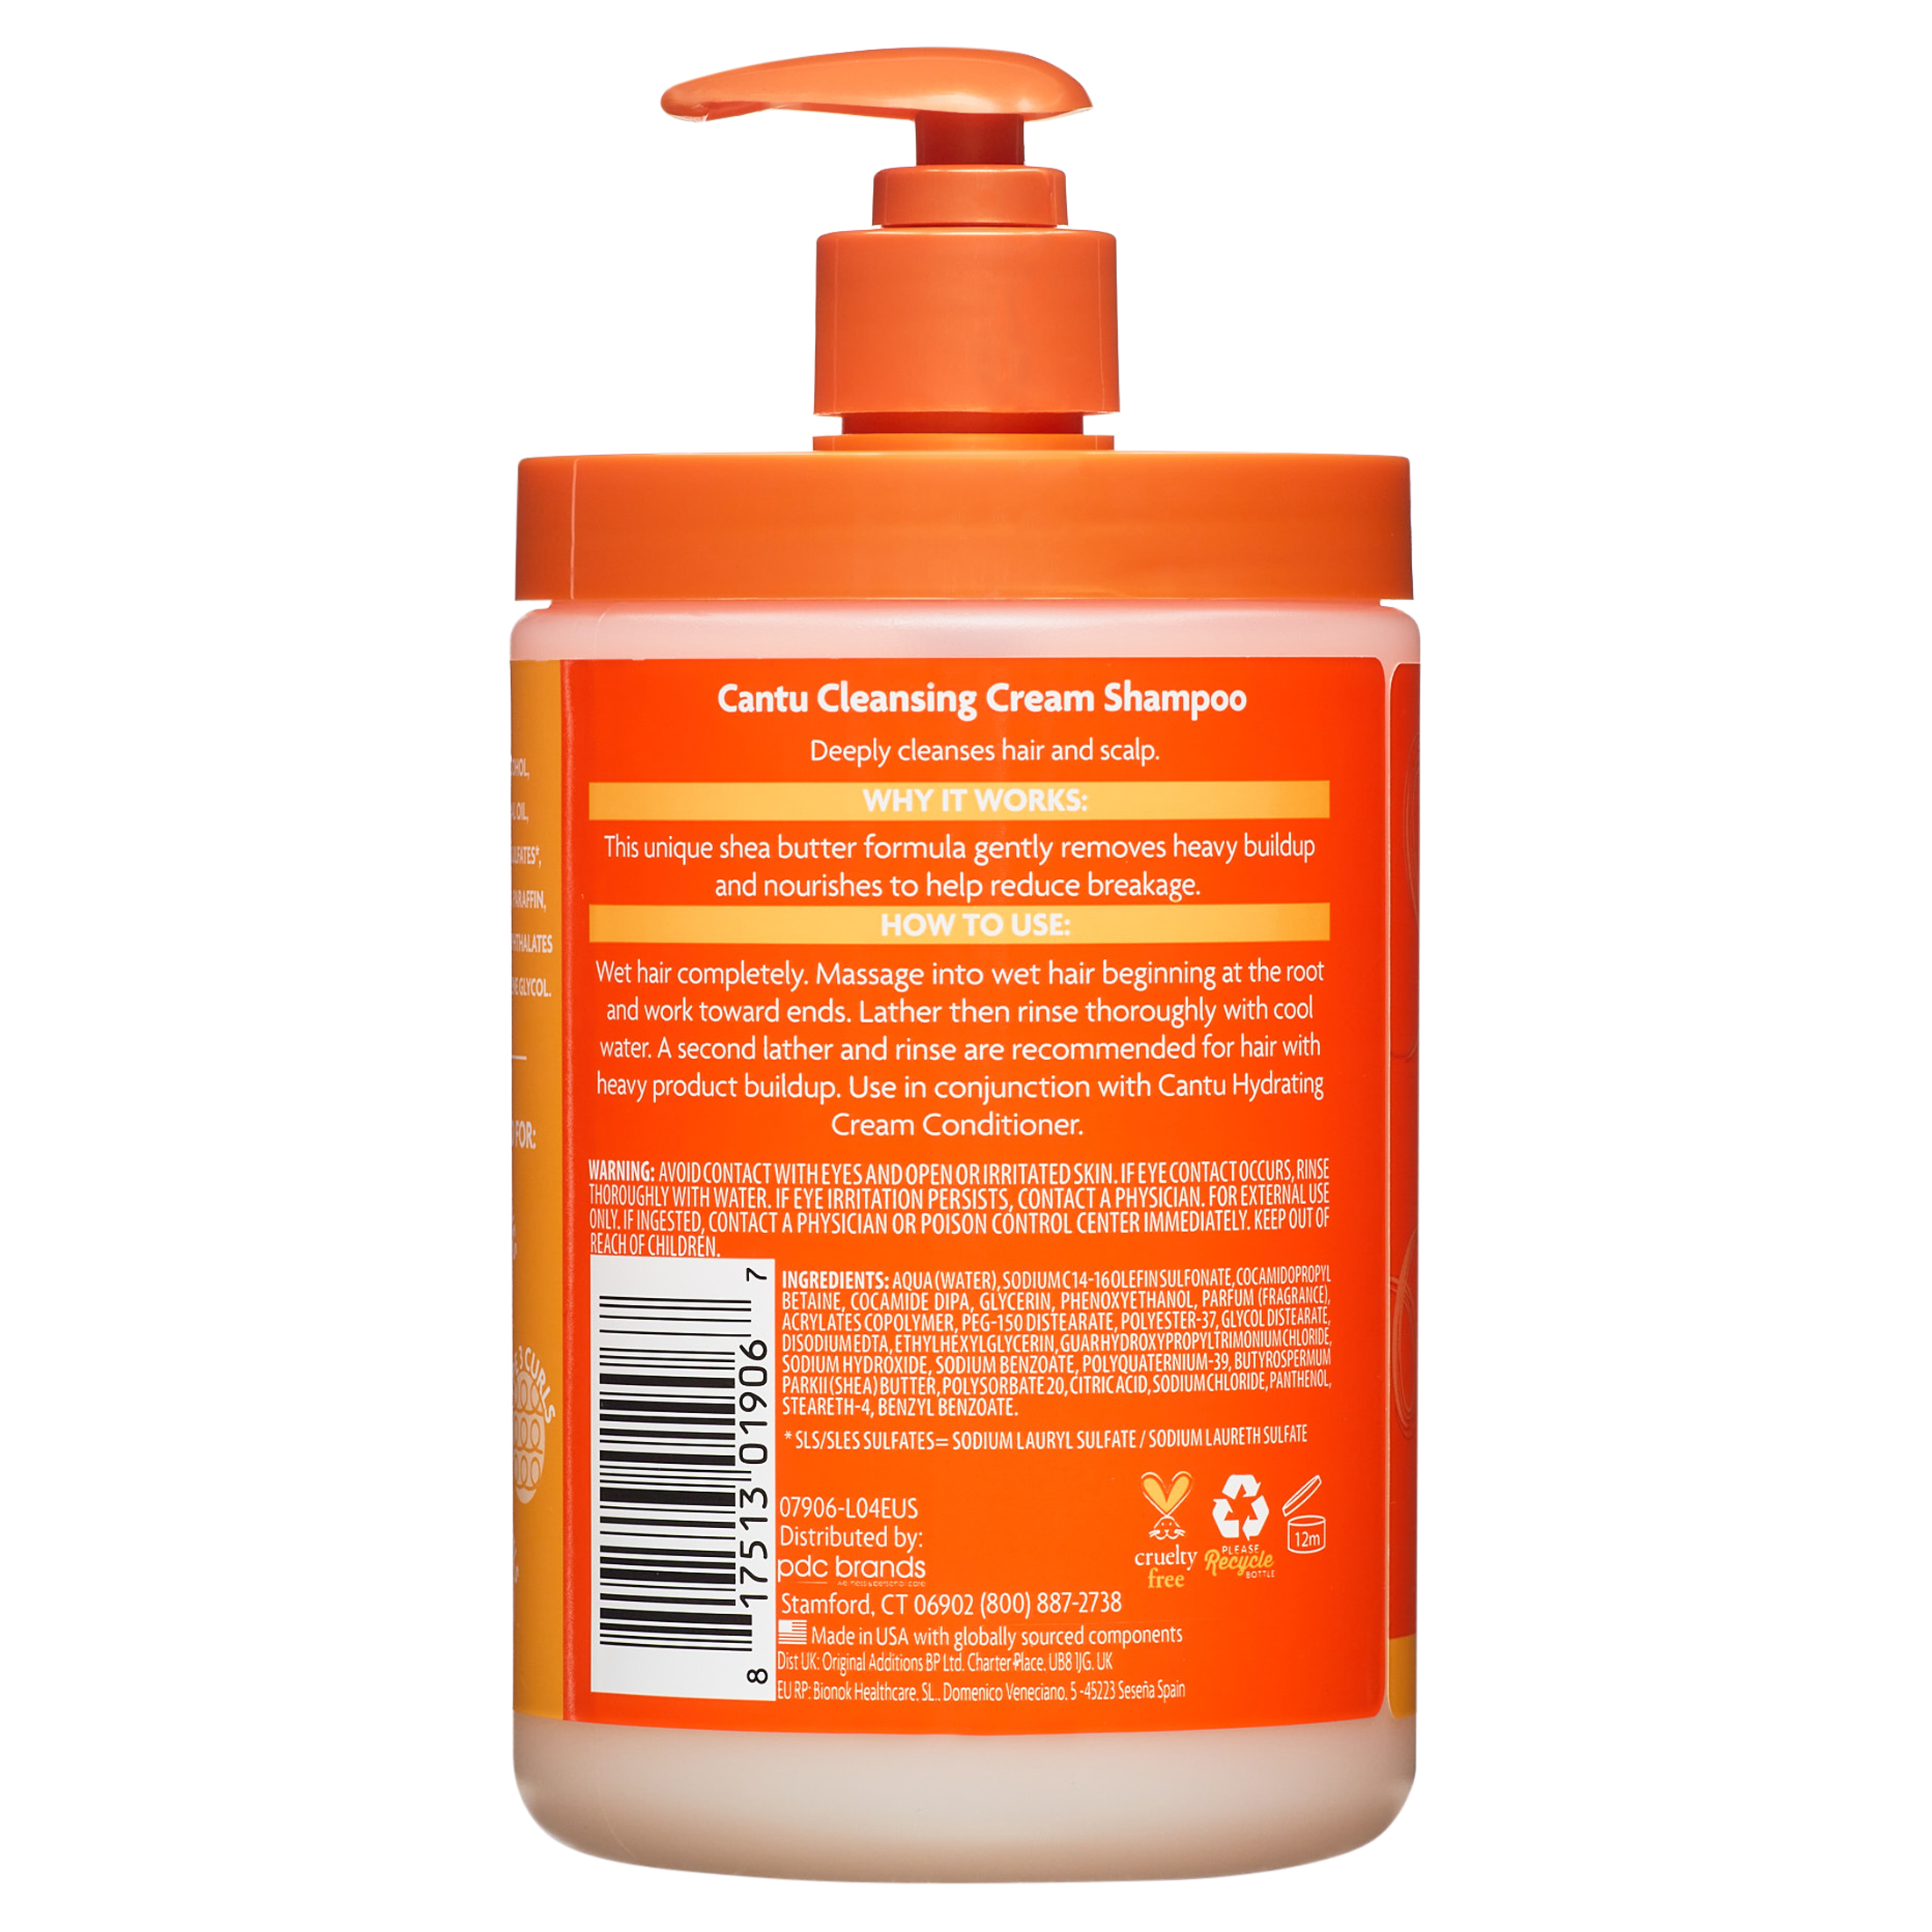 Cantu Sulfate-Free Cleansing Cream Shampoo for Natural Hair, Sulfate-Free with Shea Butter, 25 fl oz. - image 11 of 12